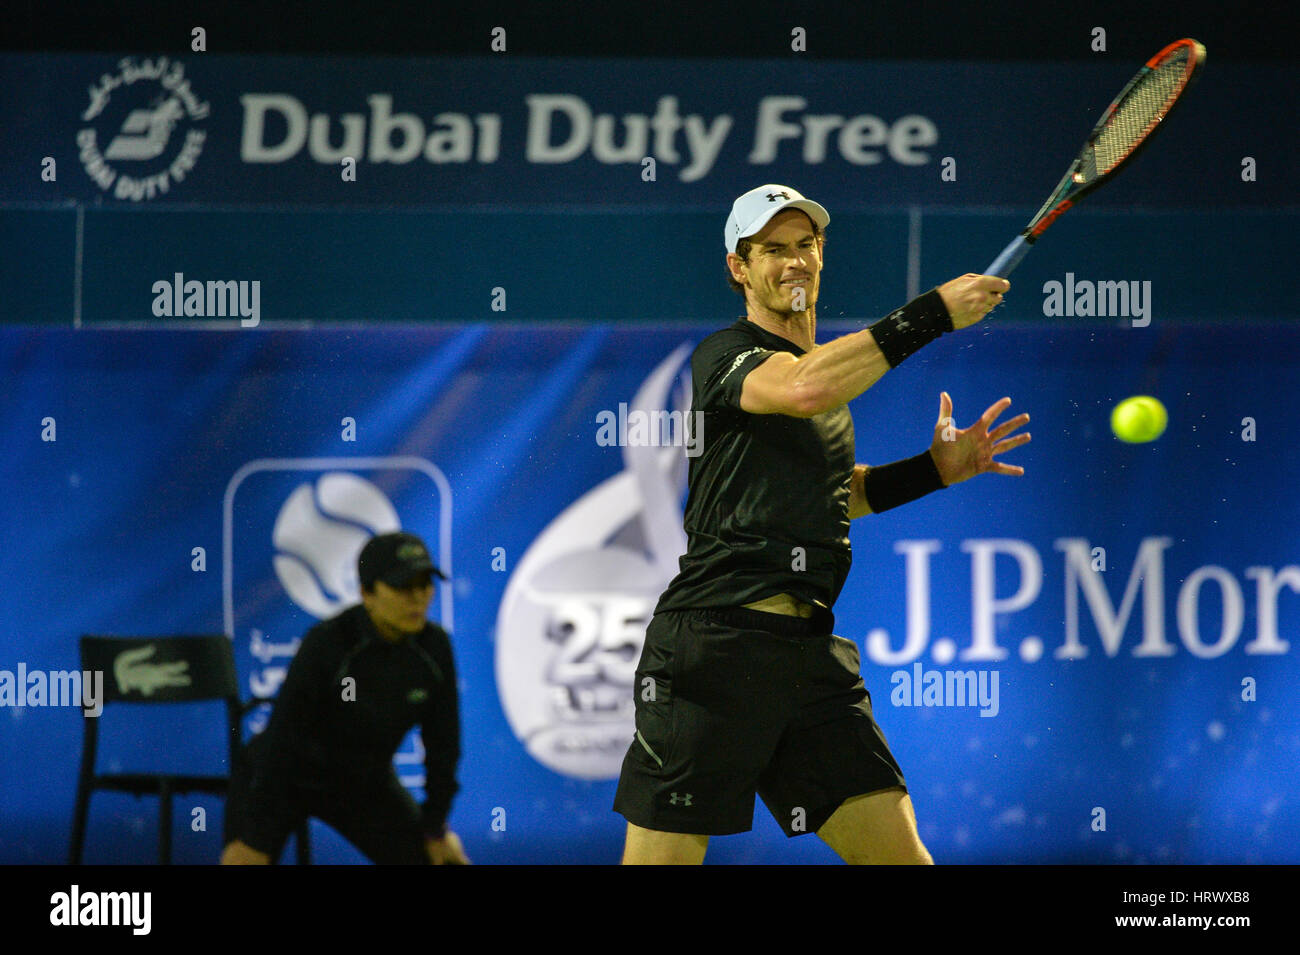 Dubai, UAE. 4th March, 2017. Dubai, UAE. 4th Mar, 2017. Britain’s Andy Murray on his way to victory against Spaniard Fernando Verdasco 6-3 6-2 at the Dubai Duty Free Tennis Championships. This is Murray’s first victory at the tournament having previously lost the final in 2012 Credit: Feroz Khan/Alamy Live News Stock Photo